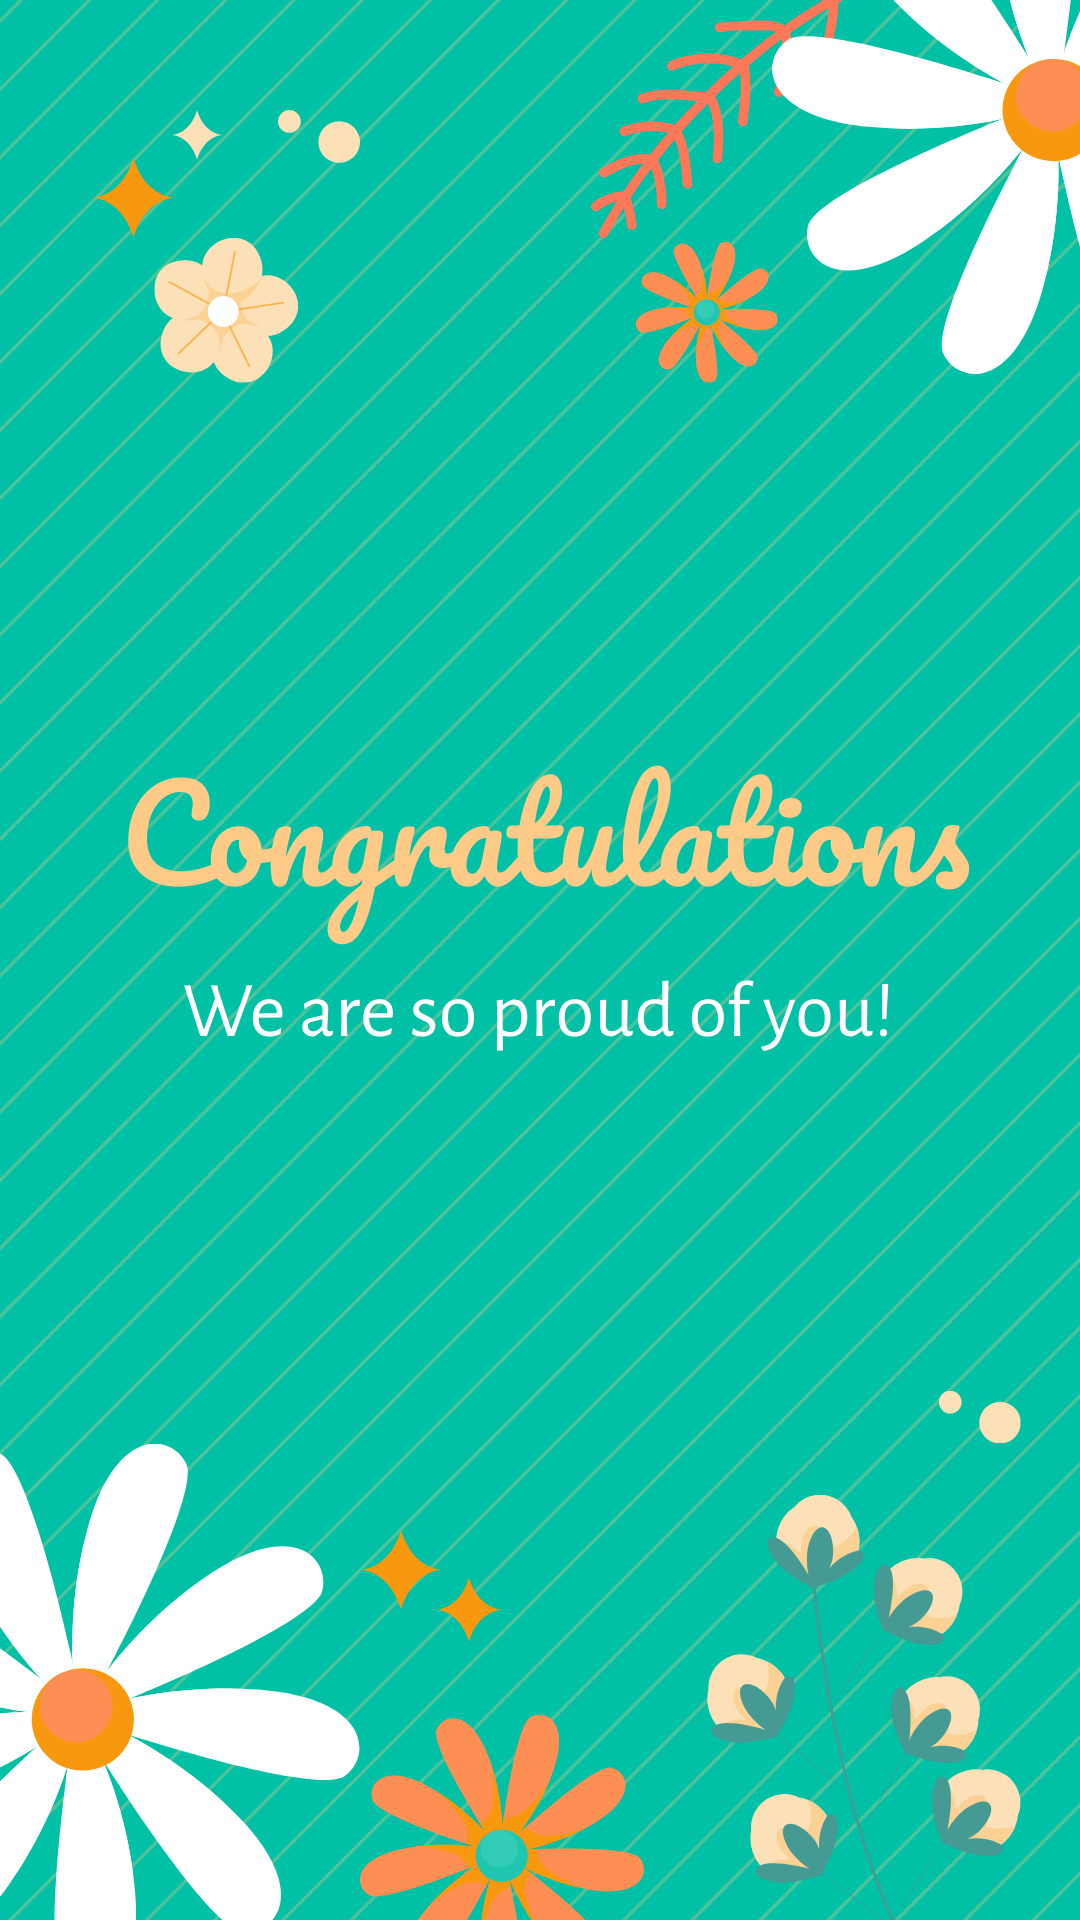 Congratulations Proud of You Card Template